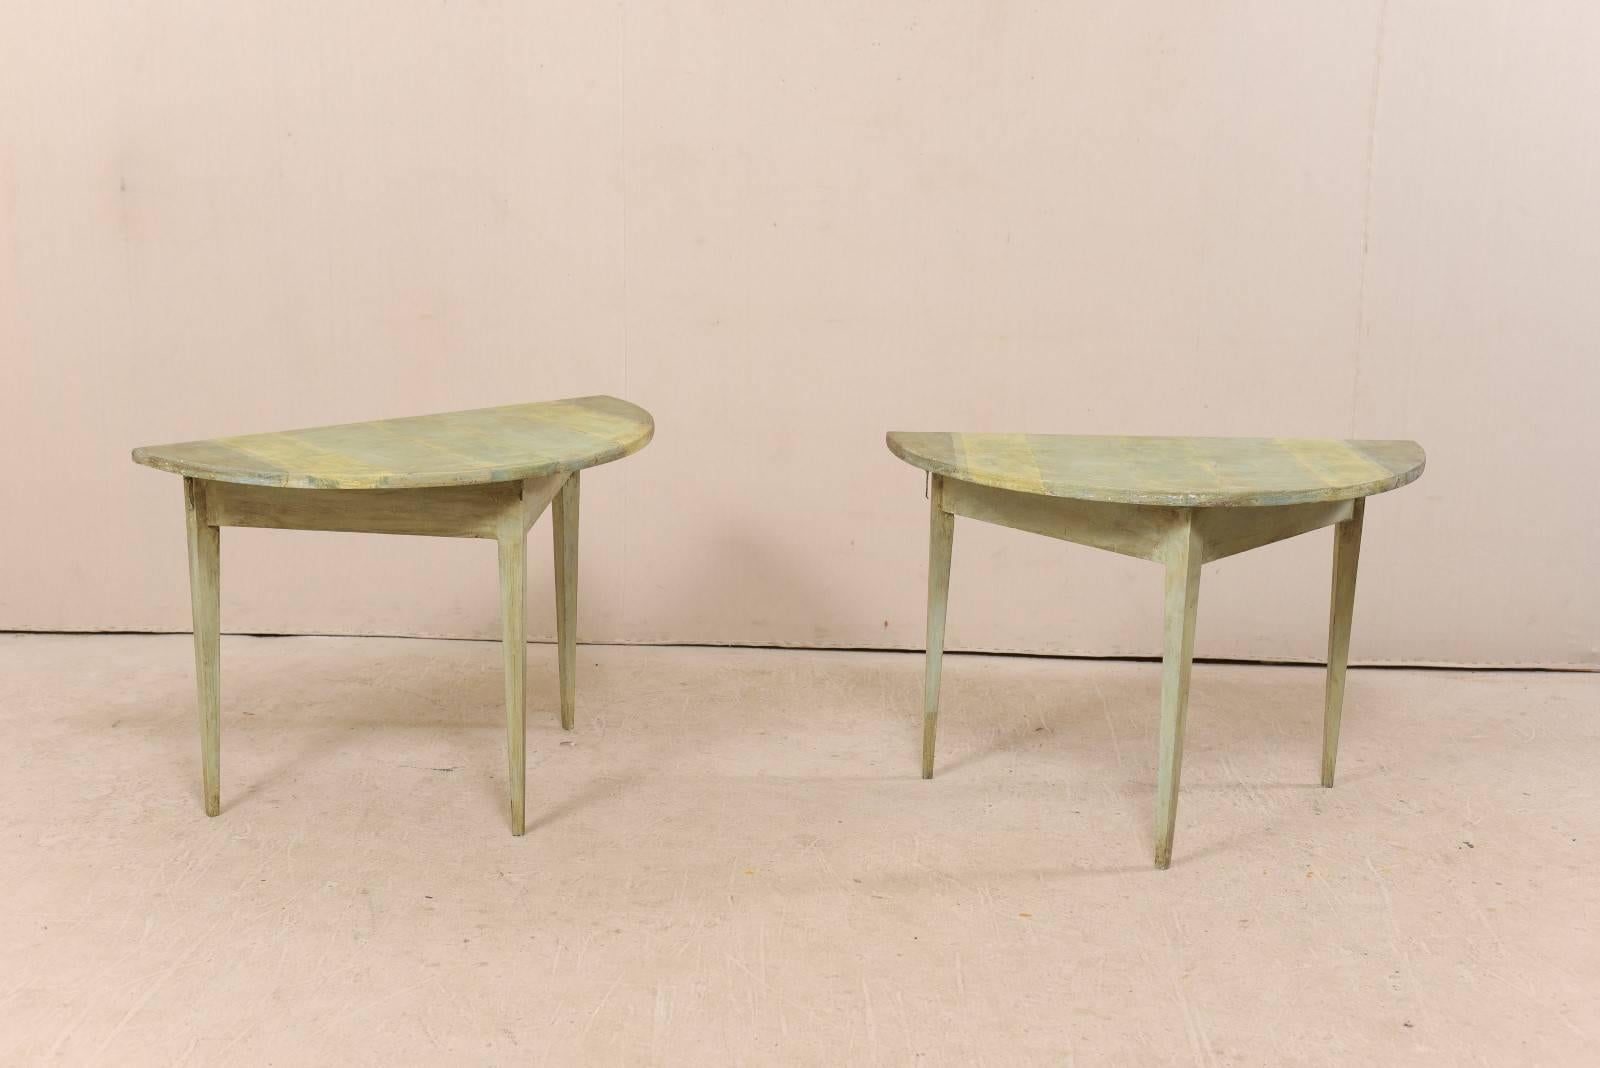 A pair of 19th century Swedish painted wood demilune tables. These antique Swedish demilune tables features a semi-circular top over a triangular shaped apron. Their tops have a painted stripe design in muted shades of celery, taupe and lemon cream.